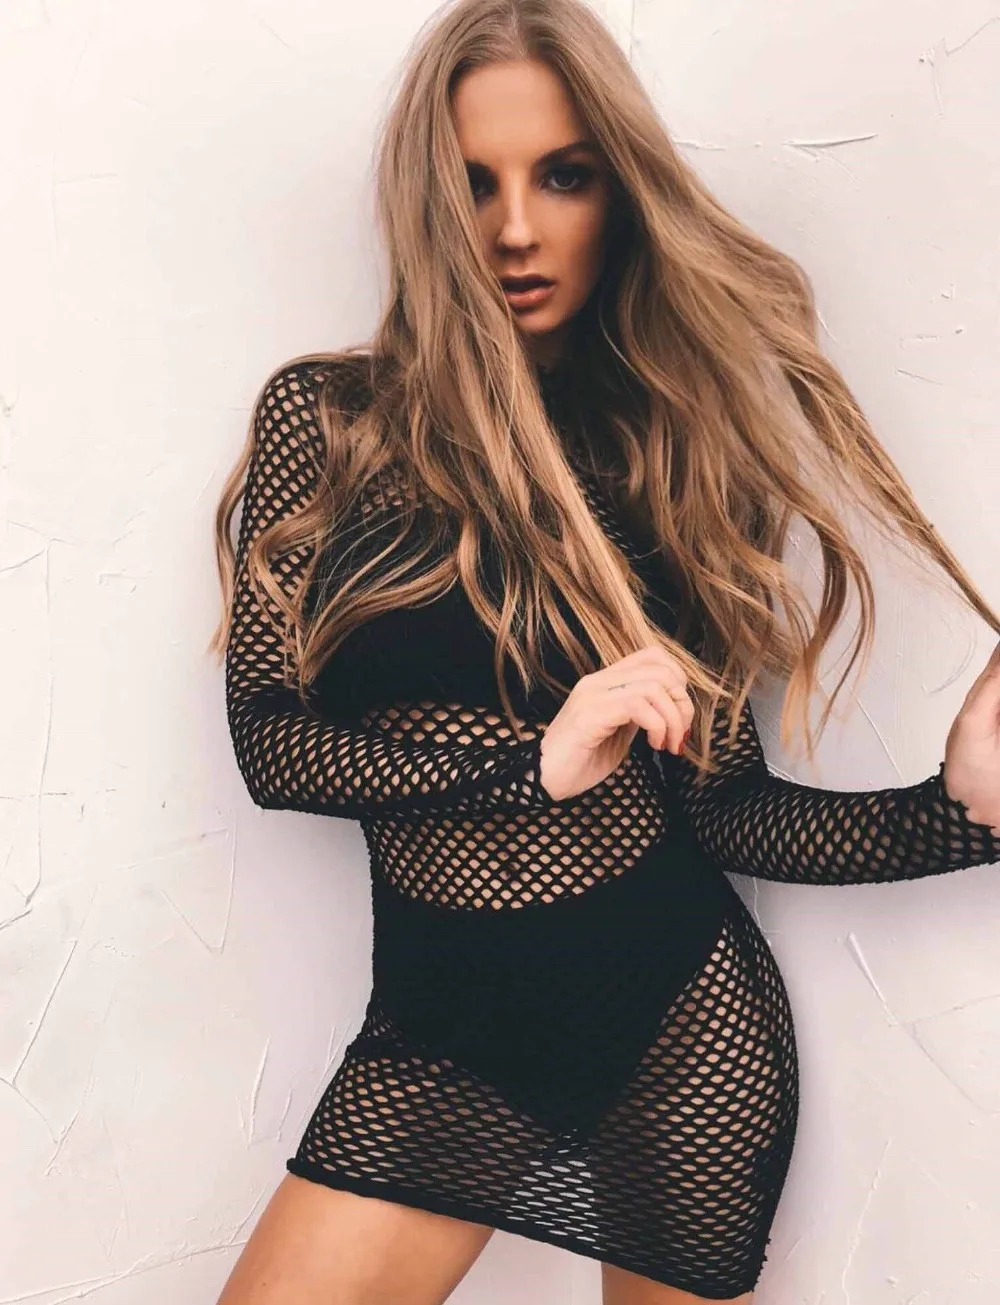 

BKLD 2018 Summer New Fashion Fishnet Tops Sexy Women Long Sleeve Hollow Out Perspective Long Mesh Tops Clubwear